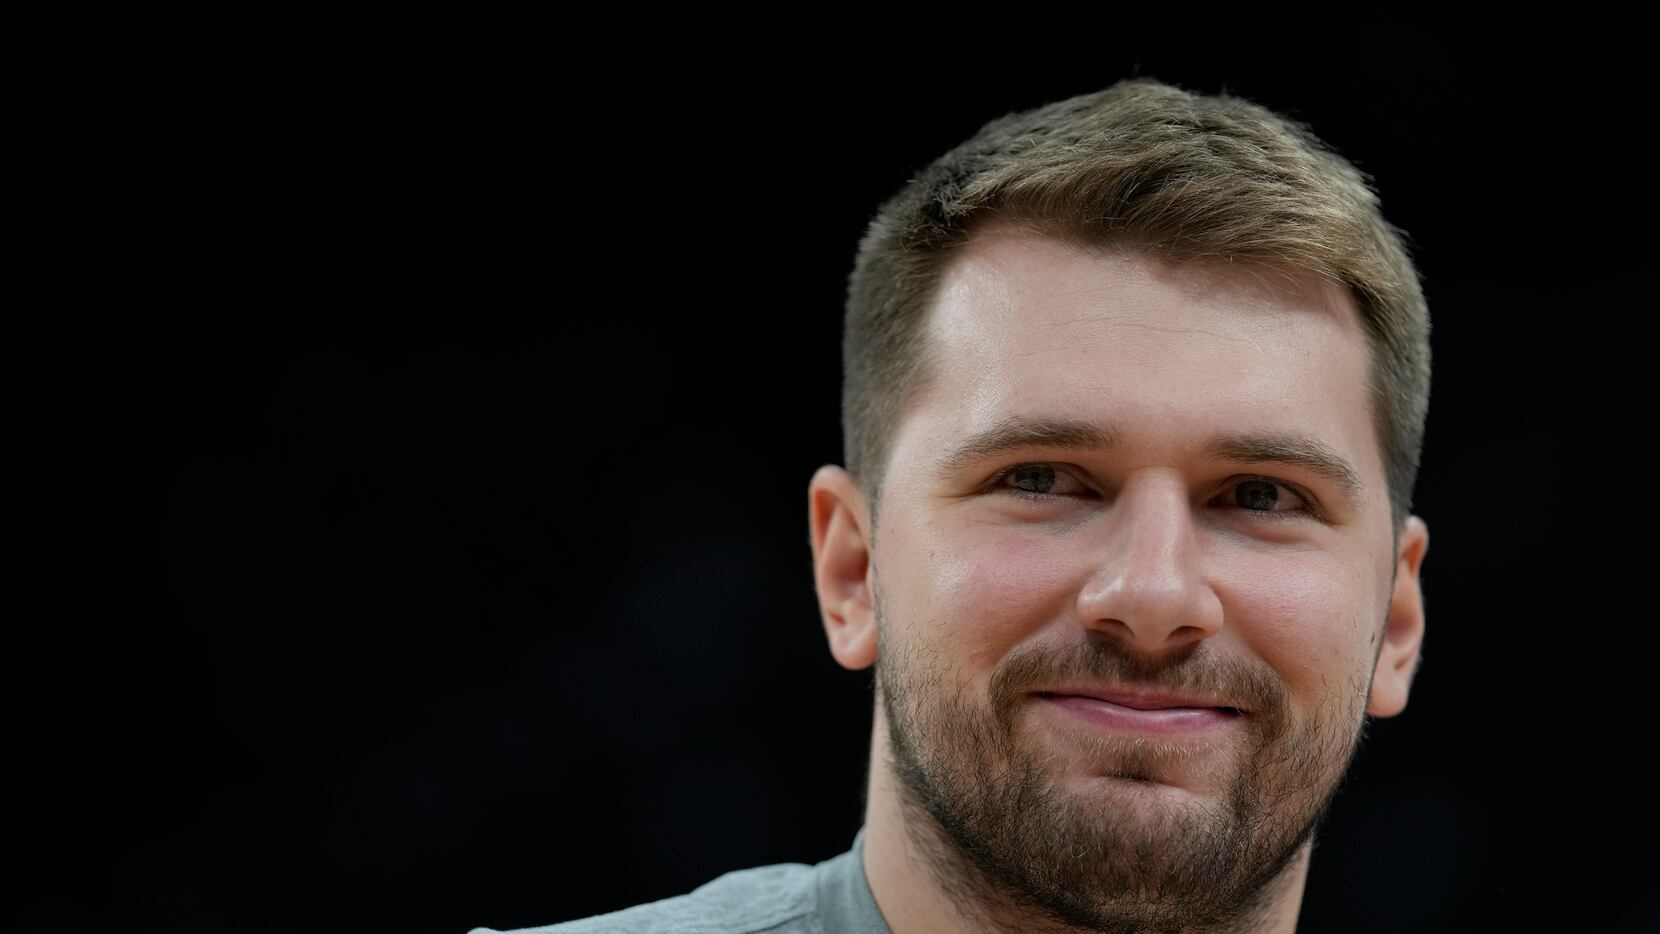 Doncic returns to Spain to warm welcome from former club Real